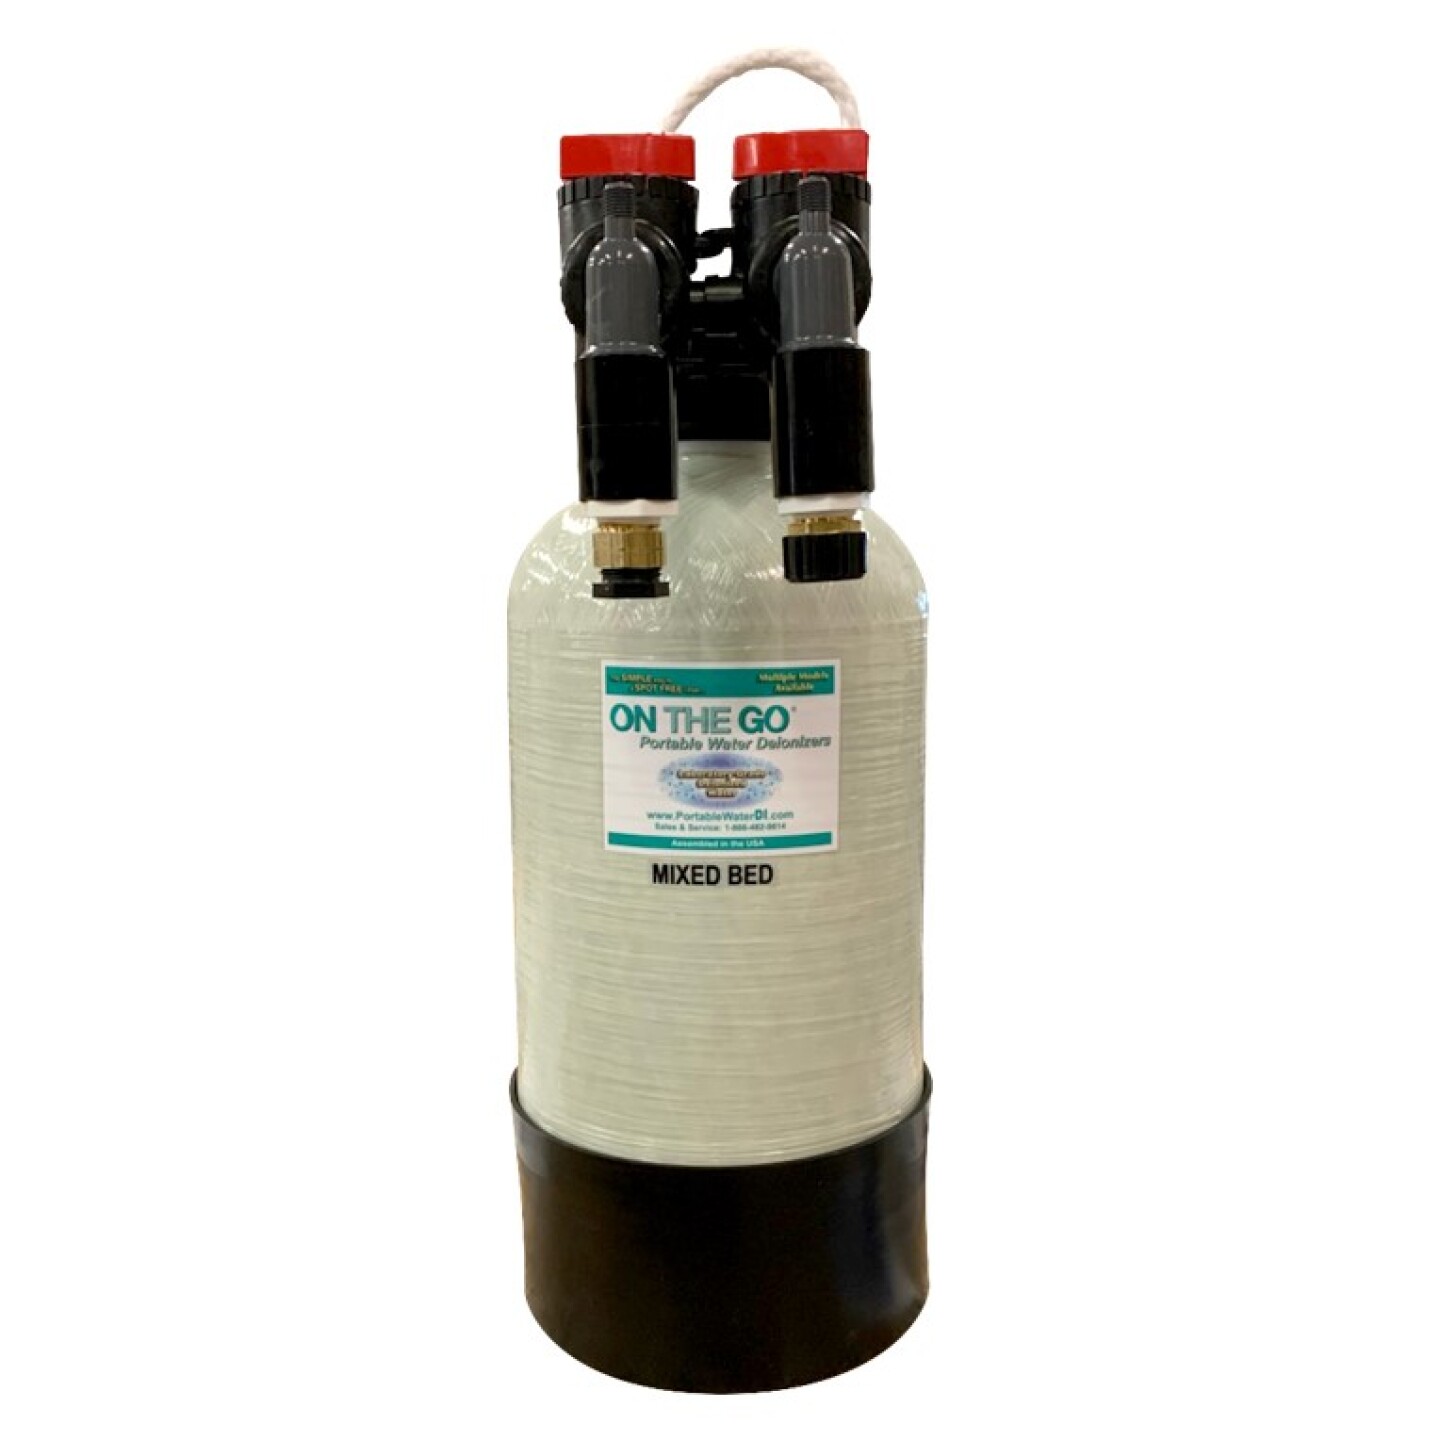 Portable Water Softener, Double Standard